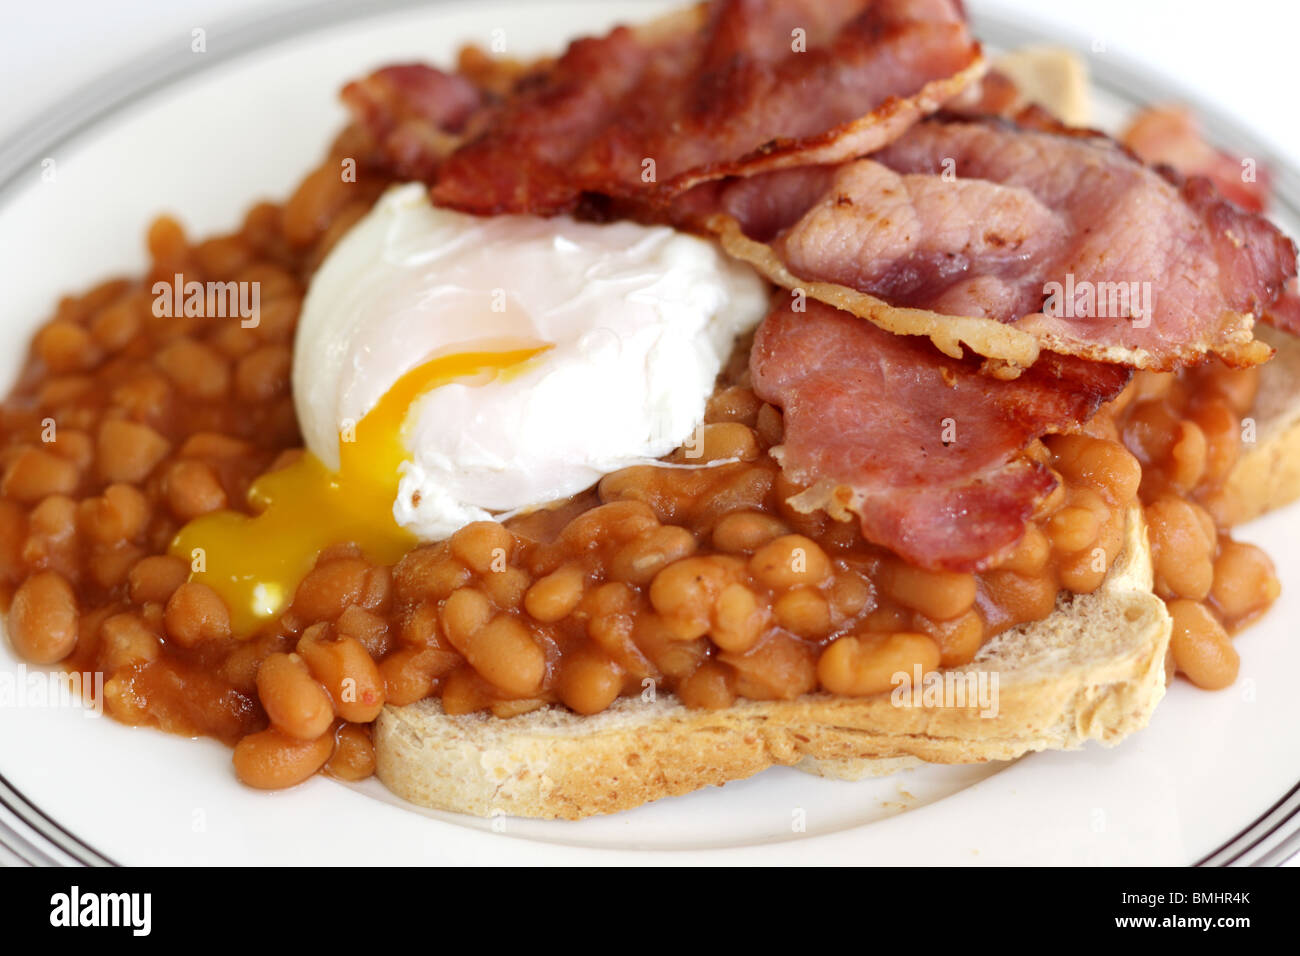 Poached Egg with Bacon and Baked Beans on Toast Stock Photo